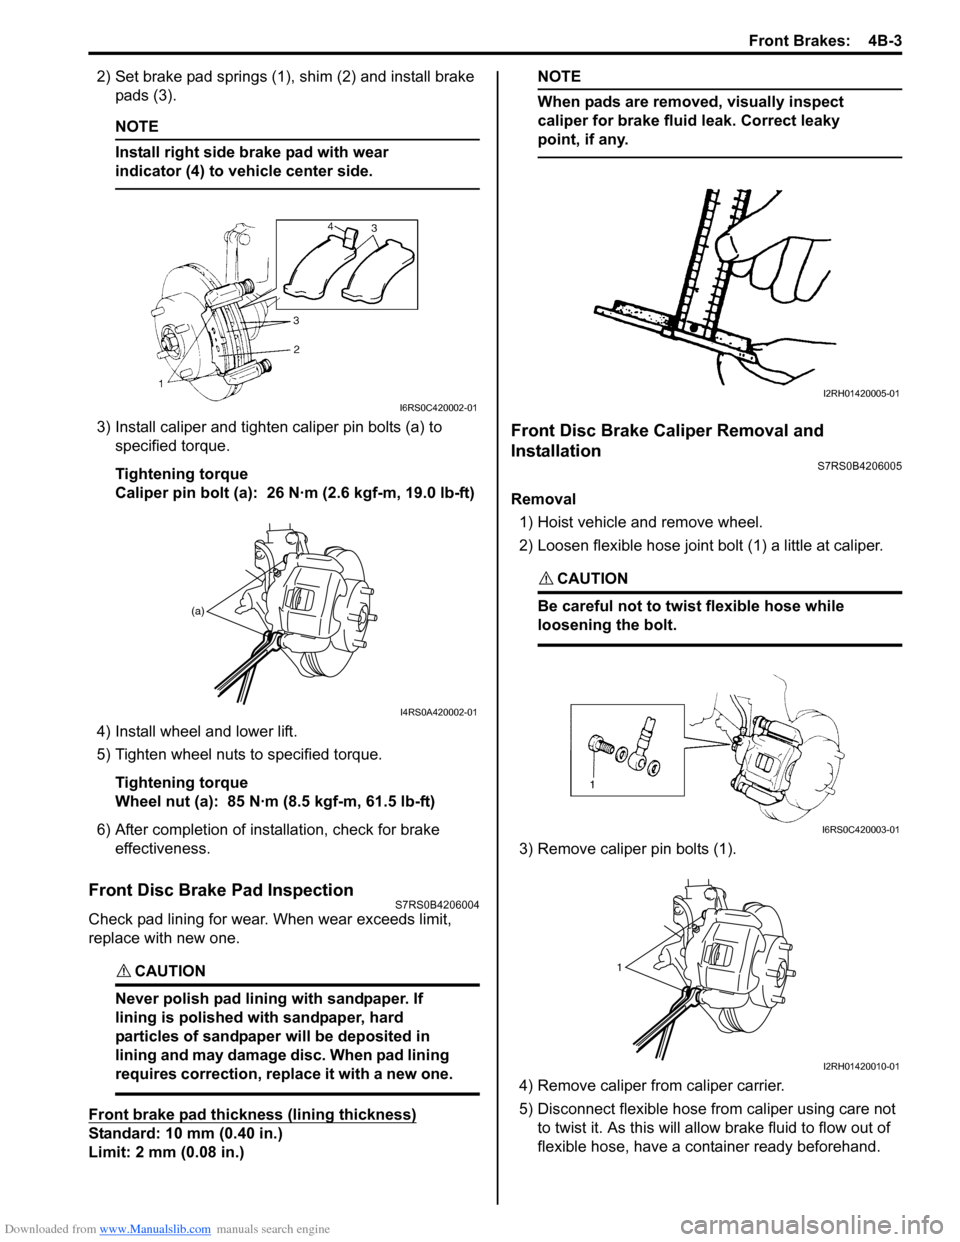 SUZUKI SWIFT 2006 2.G Service Workshop Manual Downloaded from www.Manualslib.com manuals search engine Front Brakes:  4B-3
2) Set brake pad springs (1), shim (2) and install brake pads (3).
NOTE
Install right side brake pad with wear 
indicator (